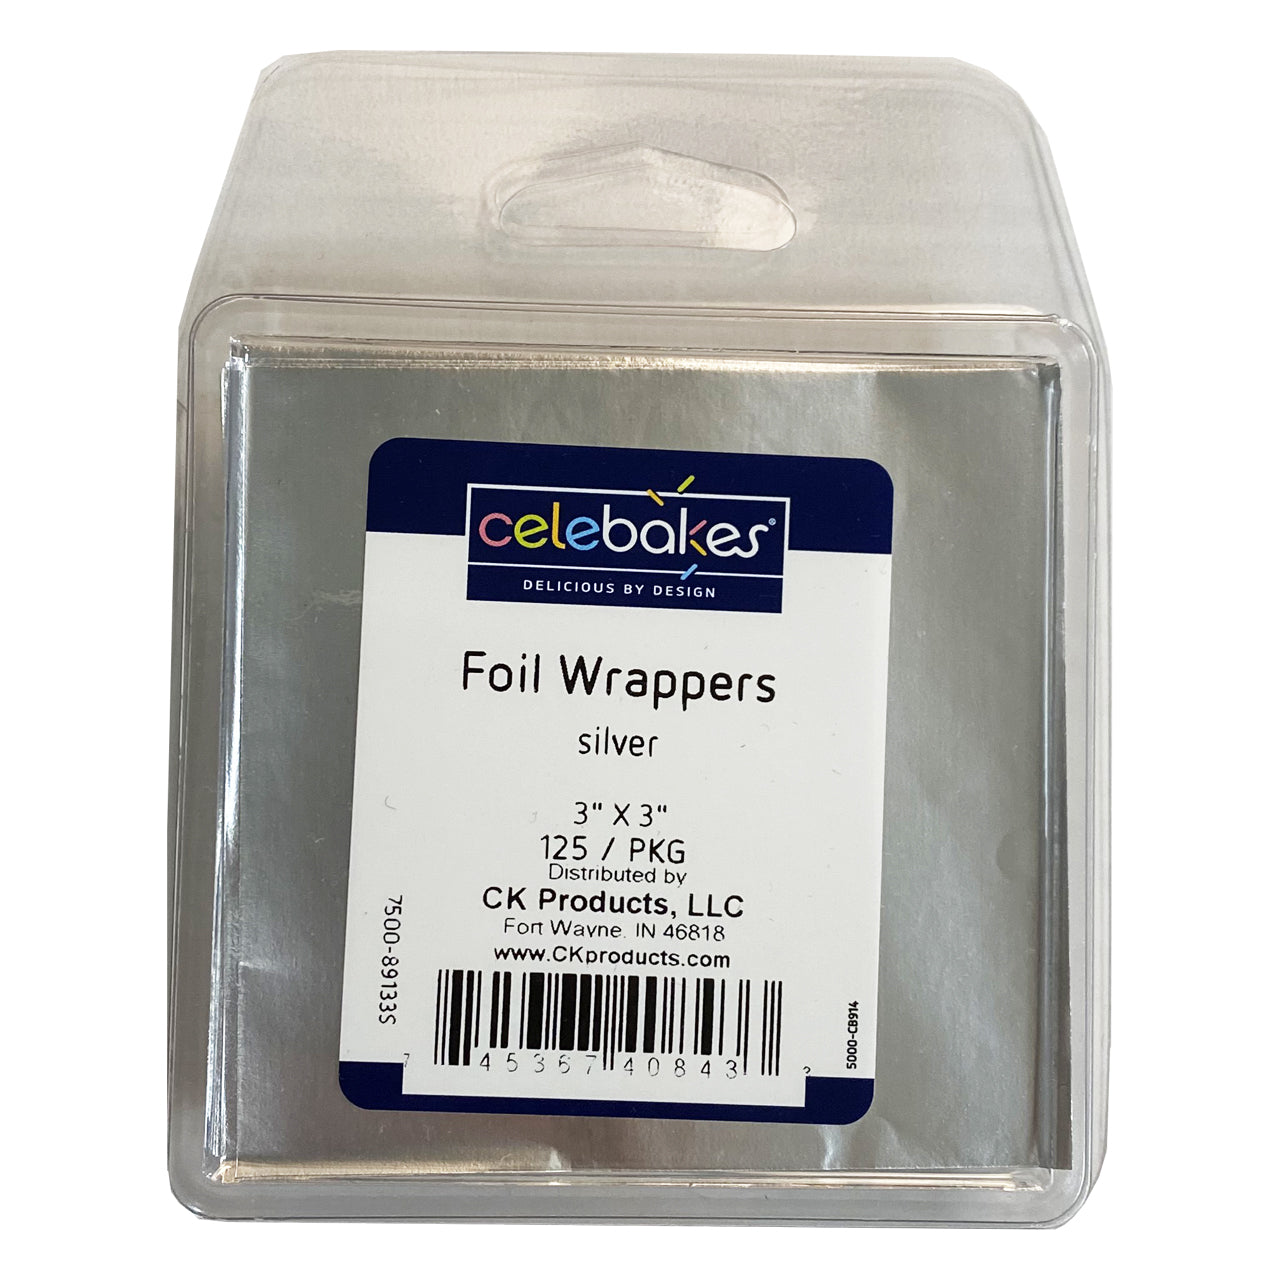 3"X3" Foil Wrappers Silver